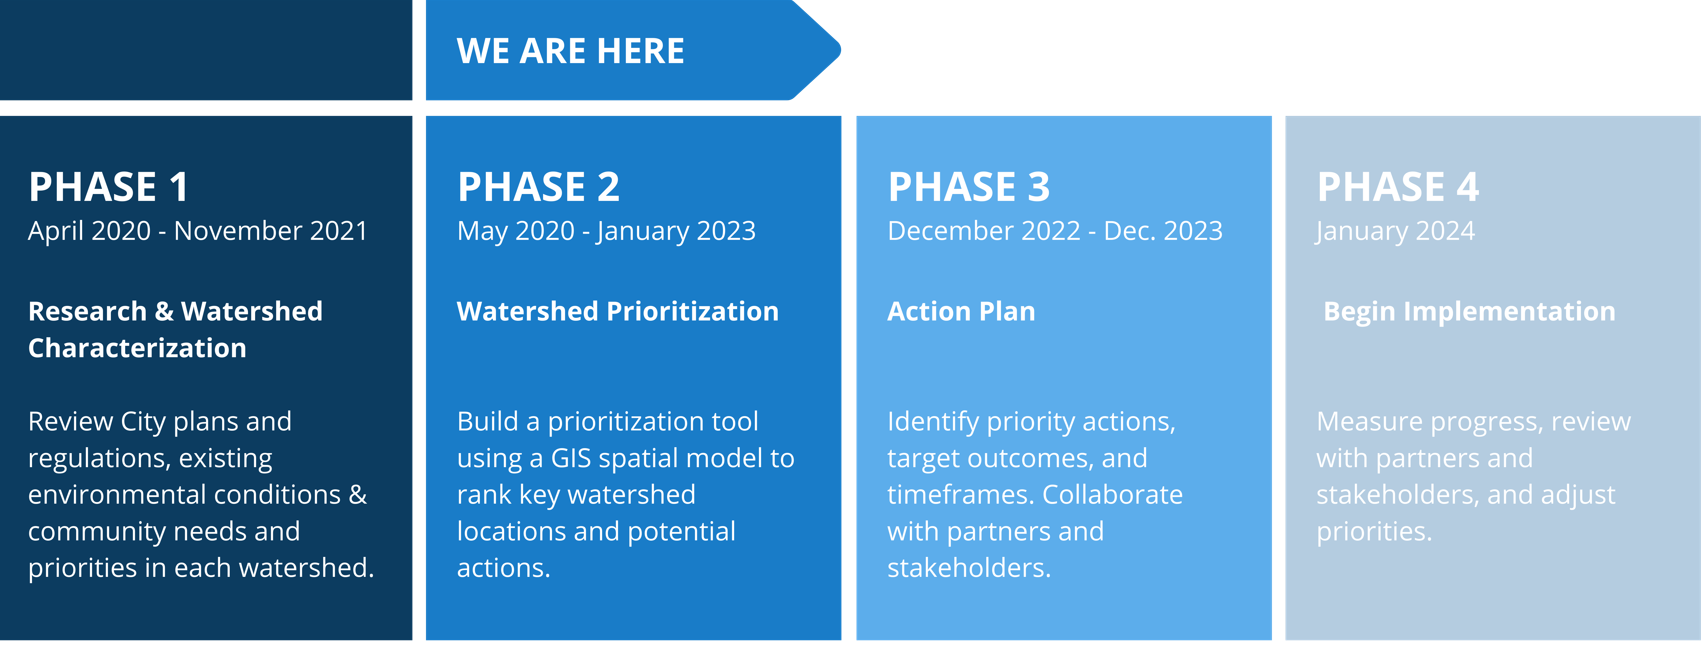 Planning Phases